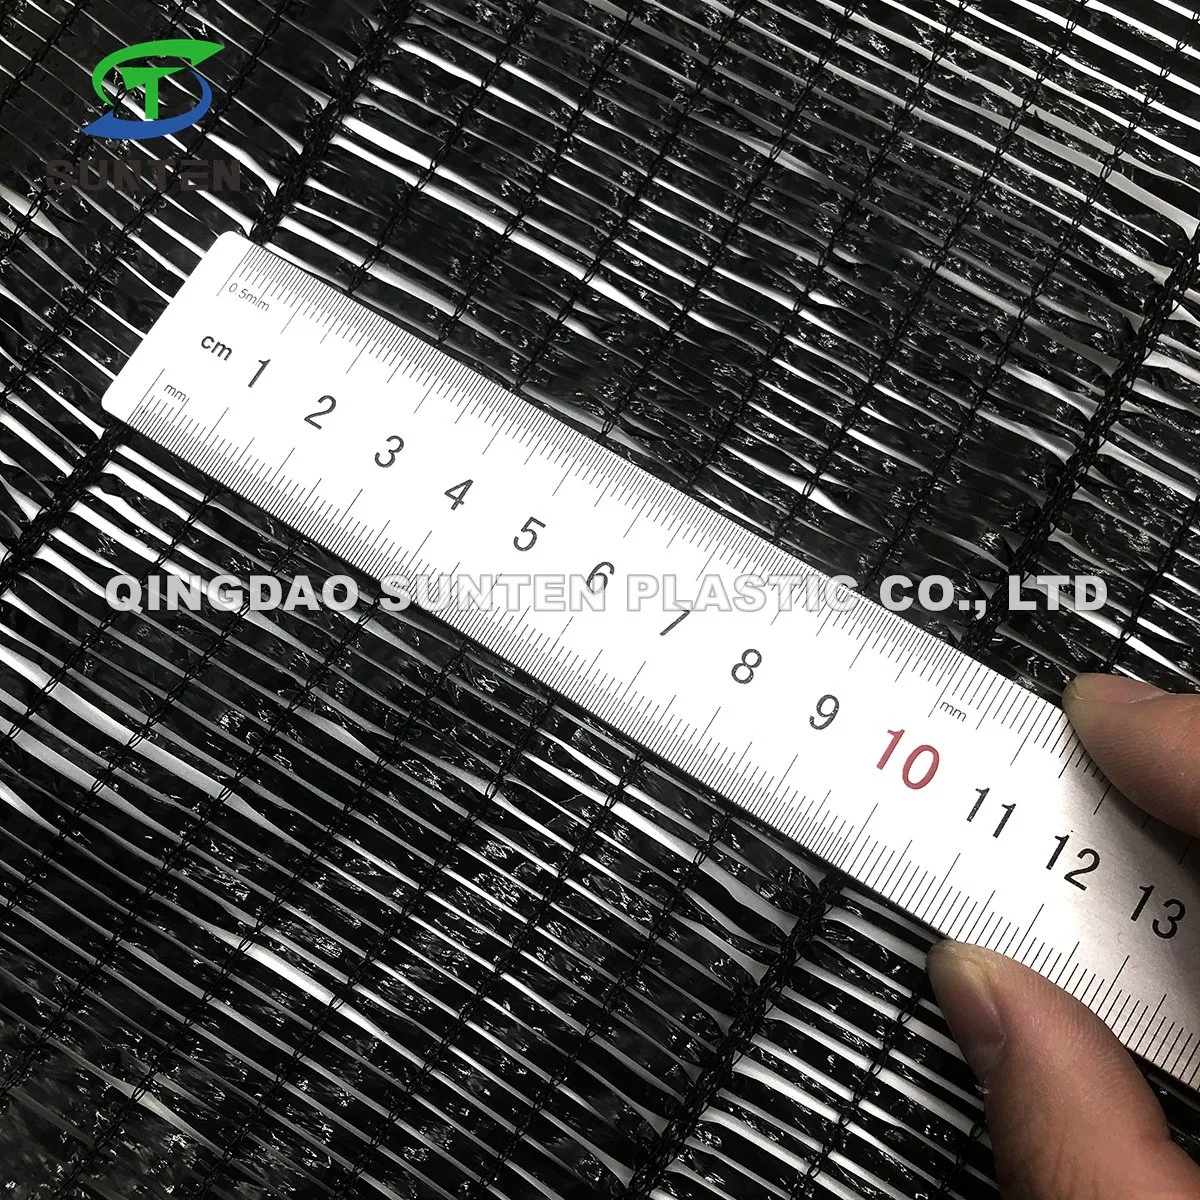 3 Needle, 6 Needle, 9 Needle Agricultural/Agri/Greenhouse/Hoticulture/Vegetable/Garden/Waterproof/Shading/Anti Hail/Insect/Mosquito/Bird/Olive/Plastic Shade Net